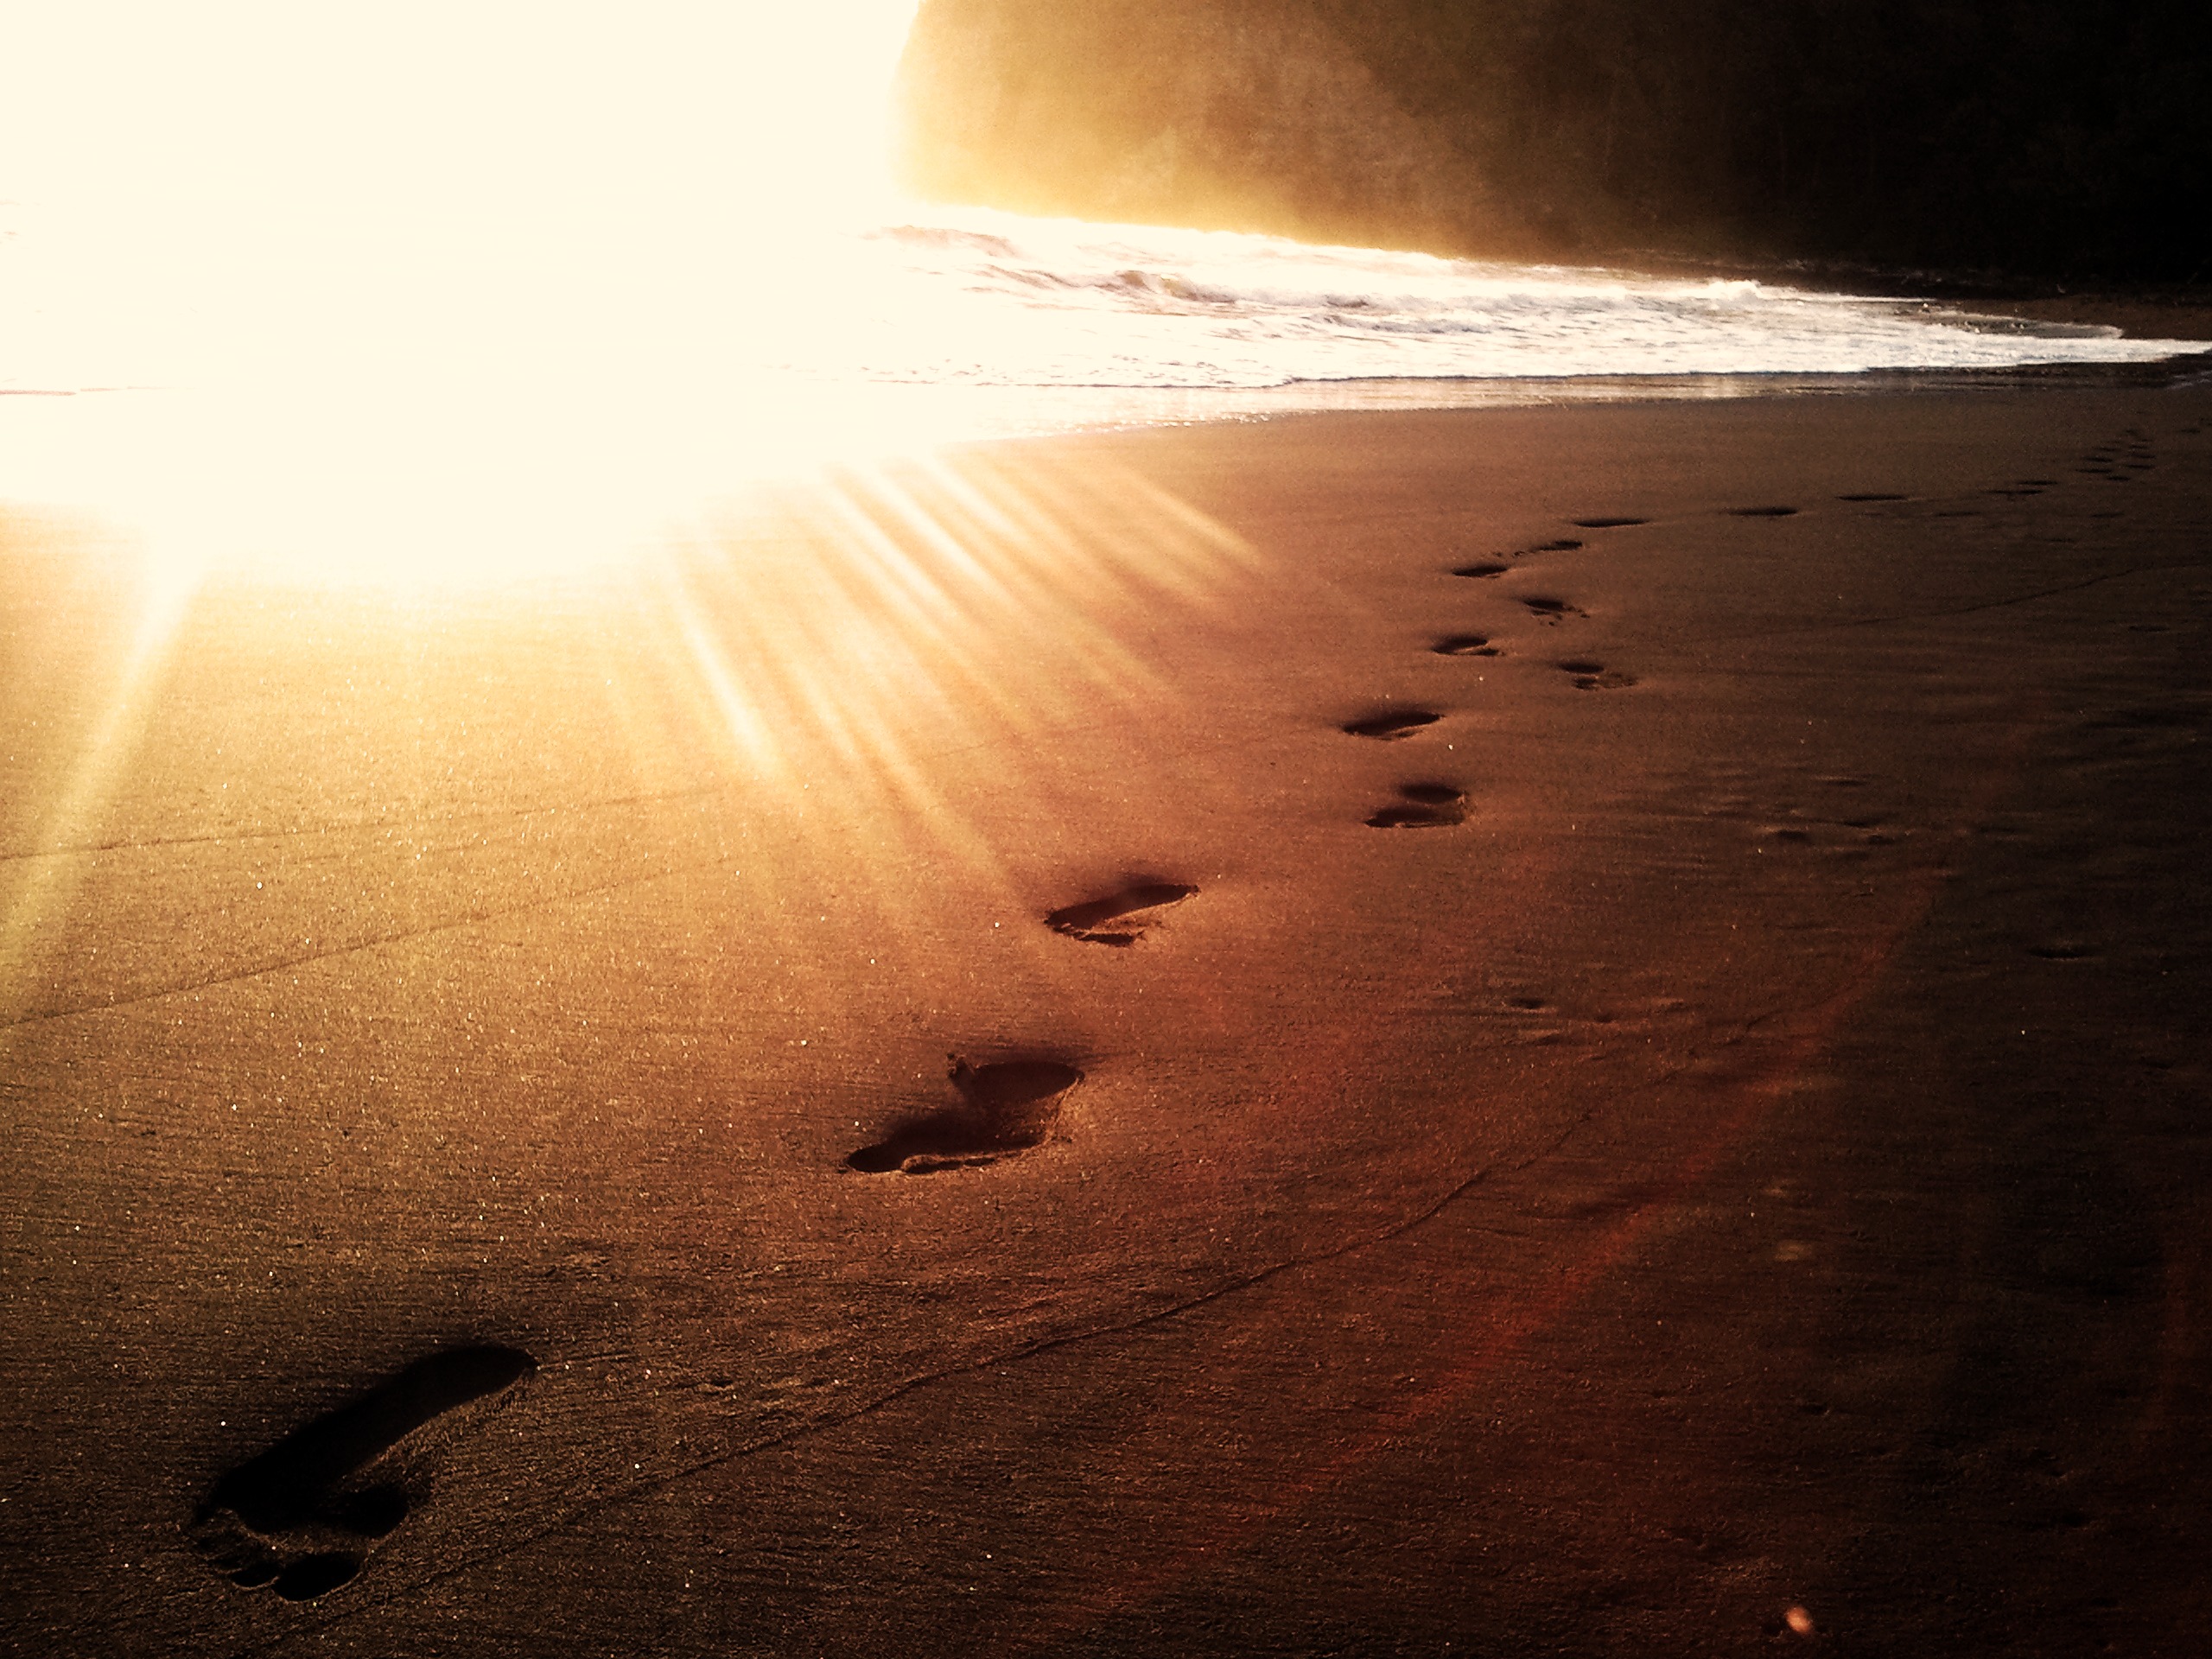 Footprints In The Sand Wallpaper HD Image New